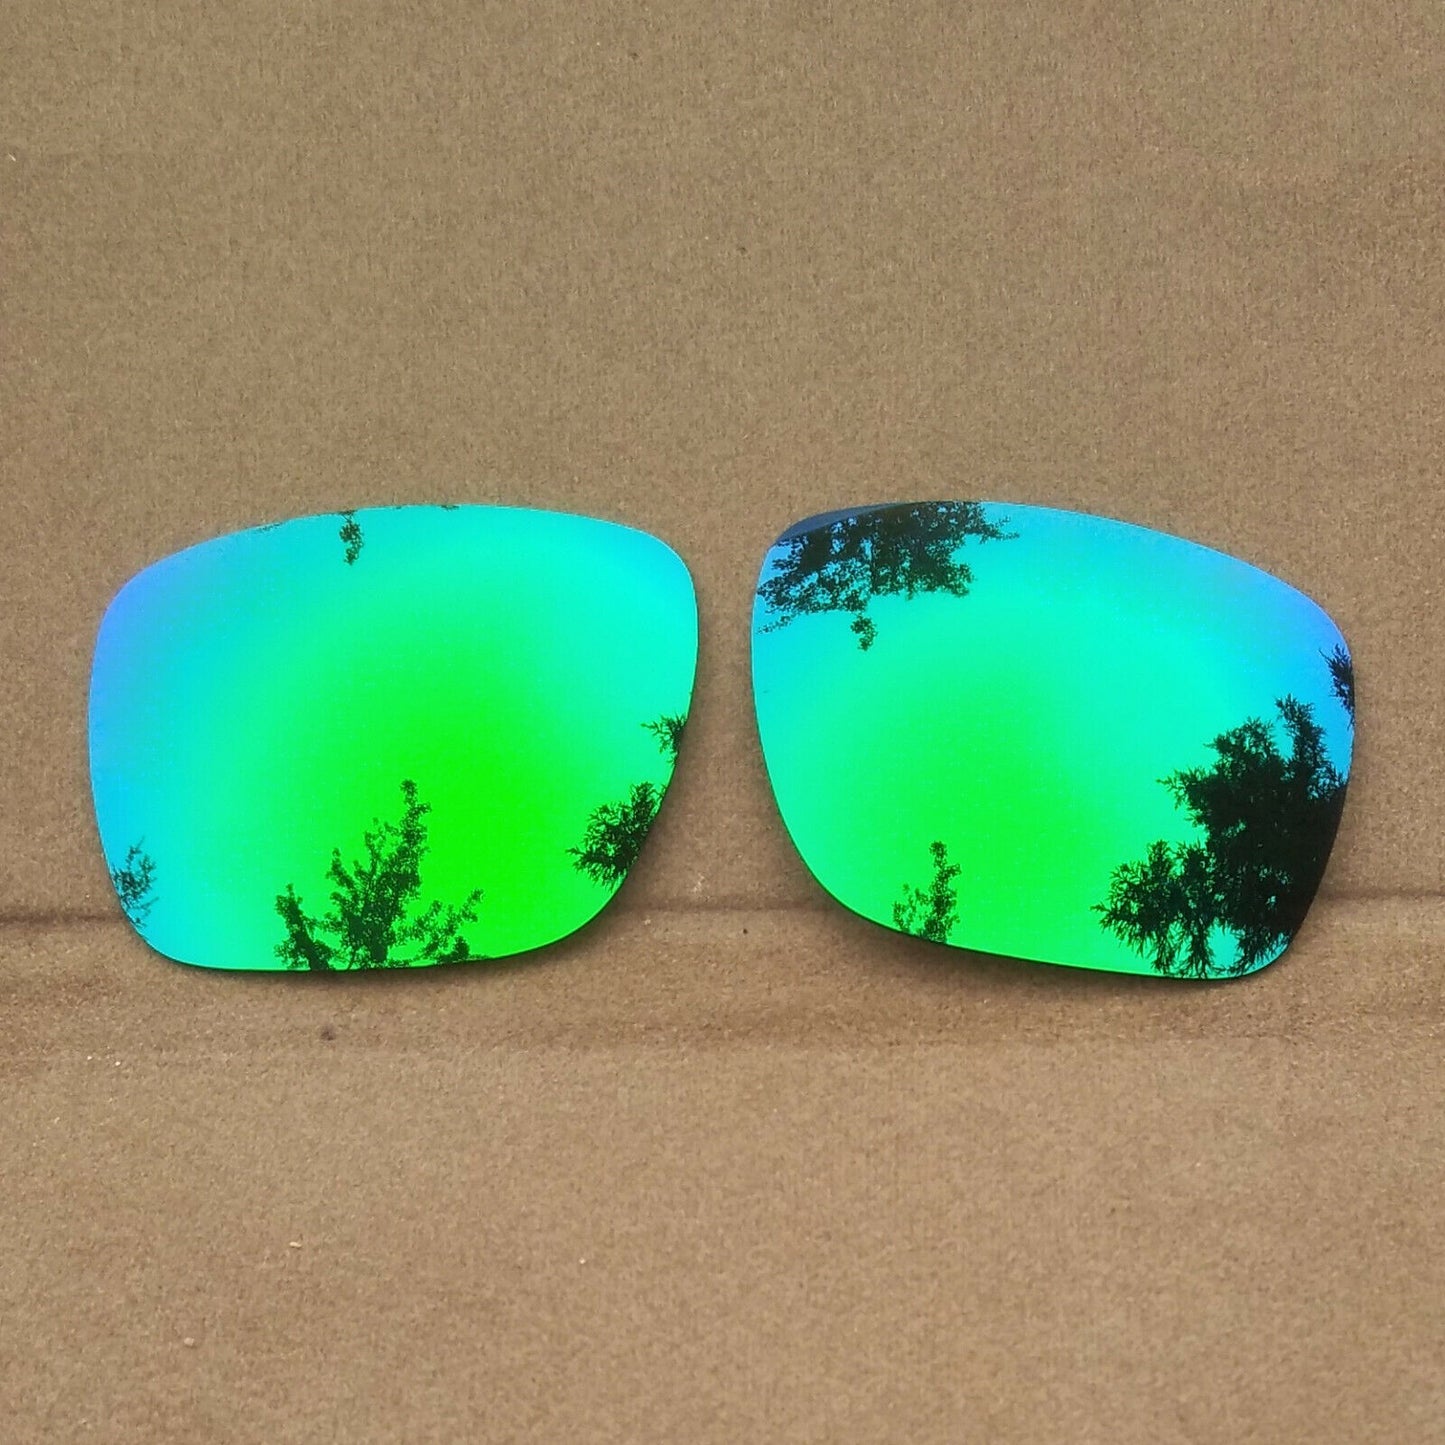 US Replacement Polarized Lenses for-Oakley Jupiter Squared OO9135 Anti Scratch